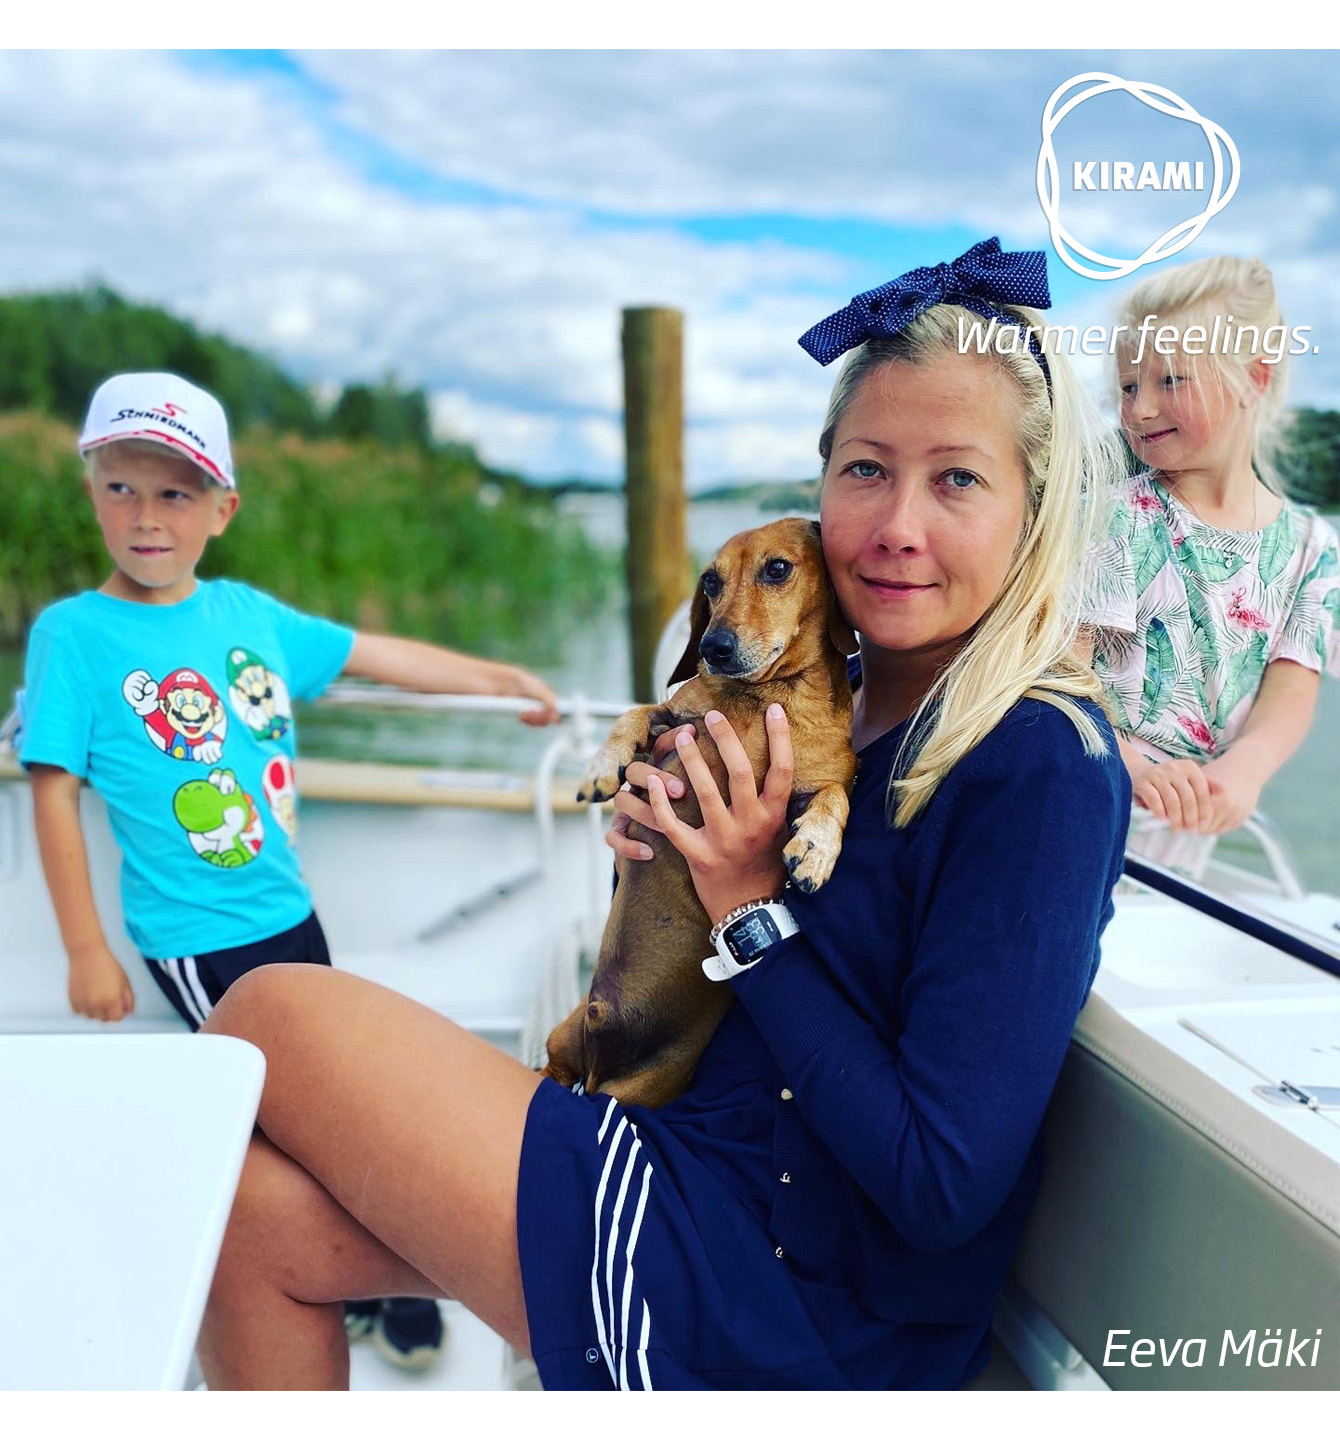 Kirami thanks Onni the dog and the Mäki family for a good story and great pictures | Kirami